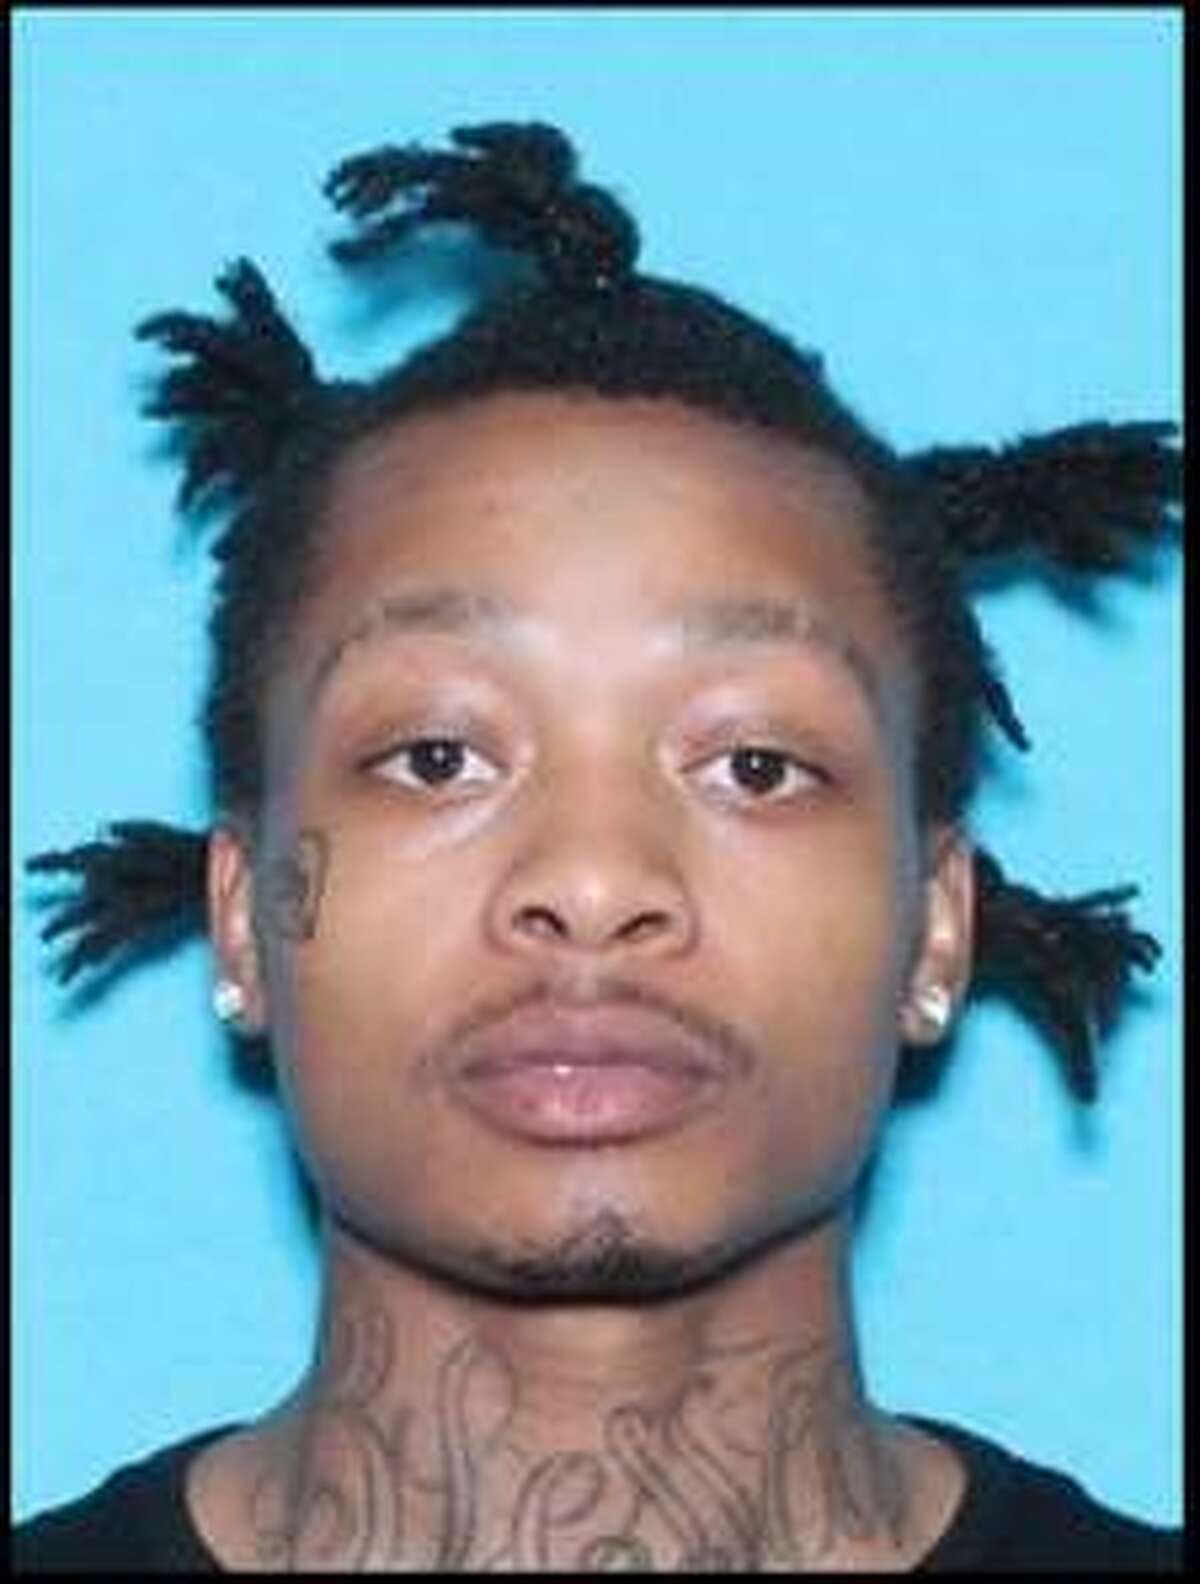 Devonte Miller, 20, is accused of shooting an 18-year-old woman at a San Marcos Apartment complex on Sept. 24.